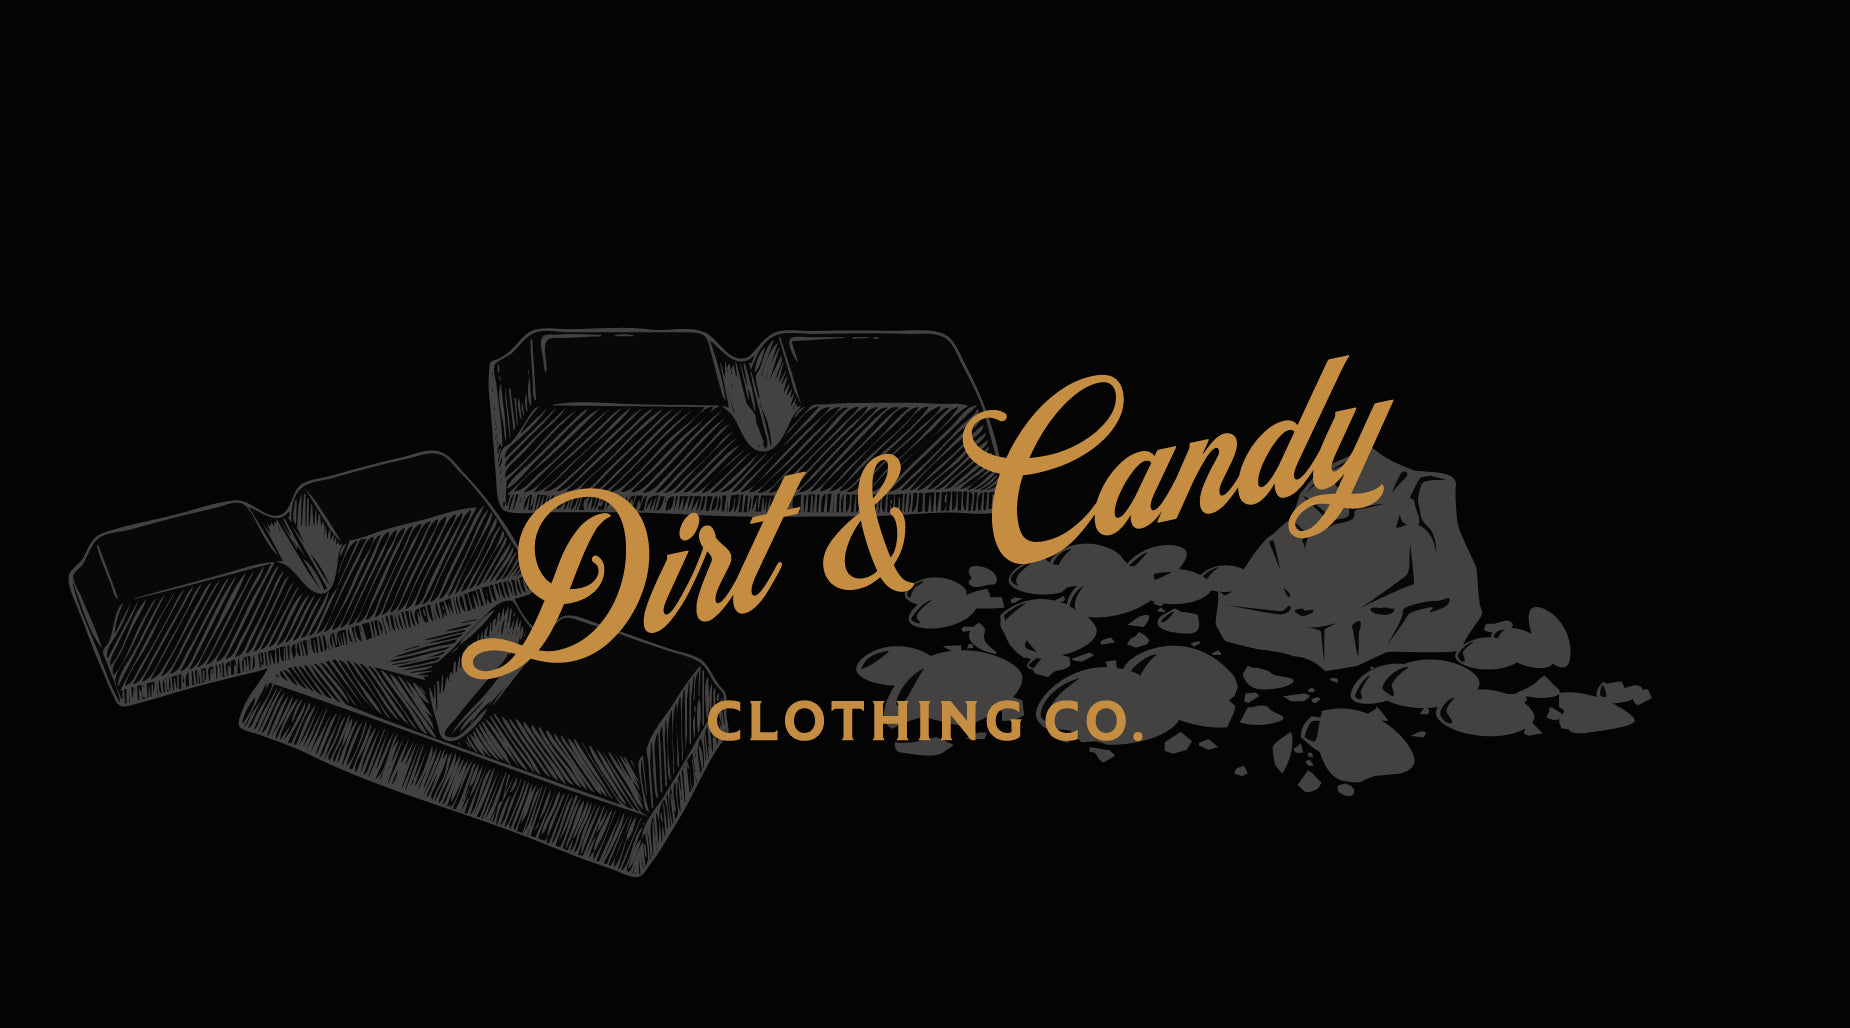 Dirt and Candy clothing co